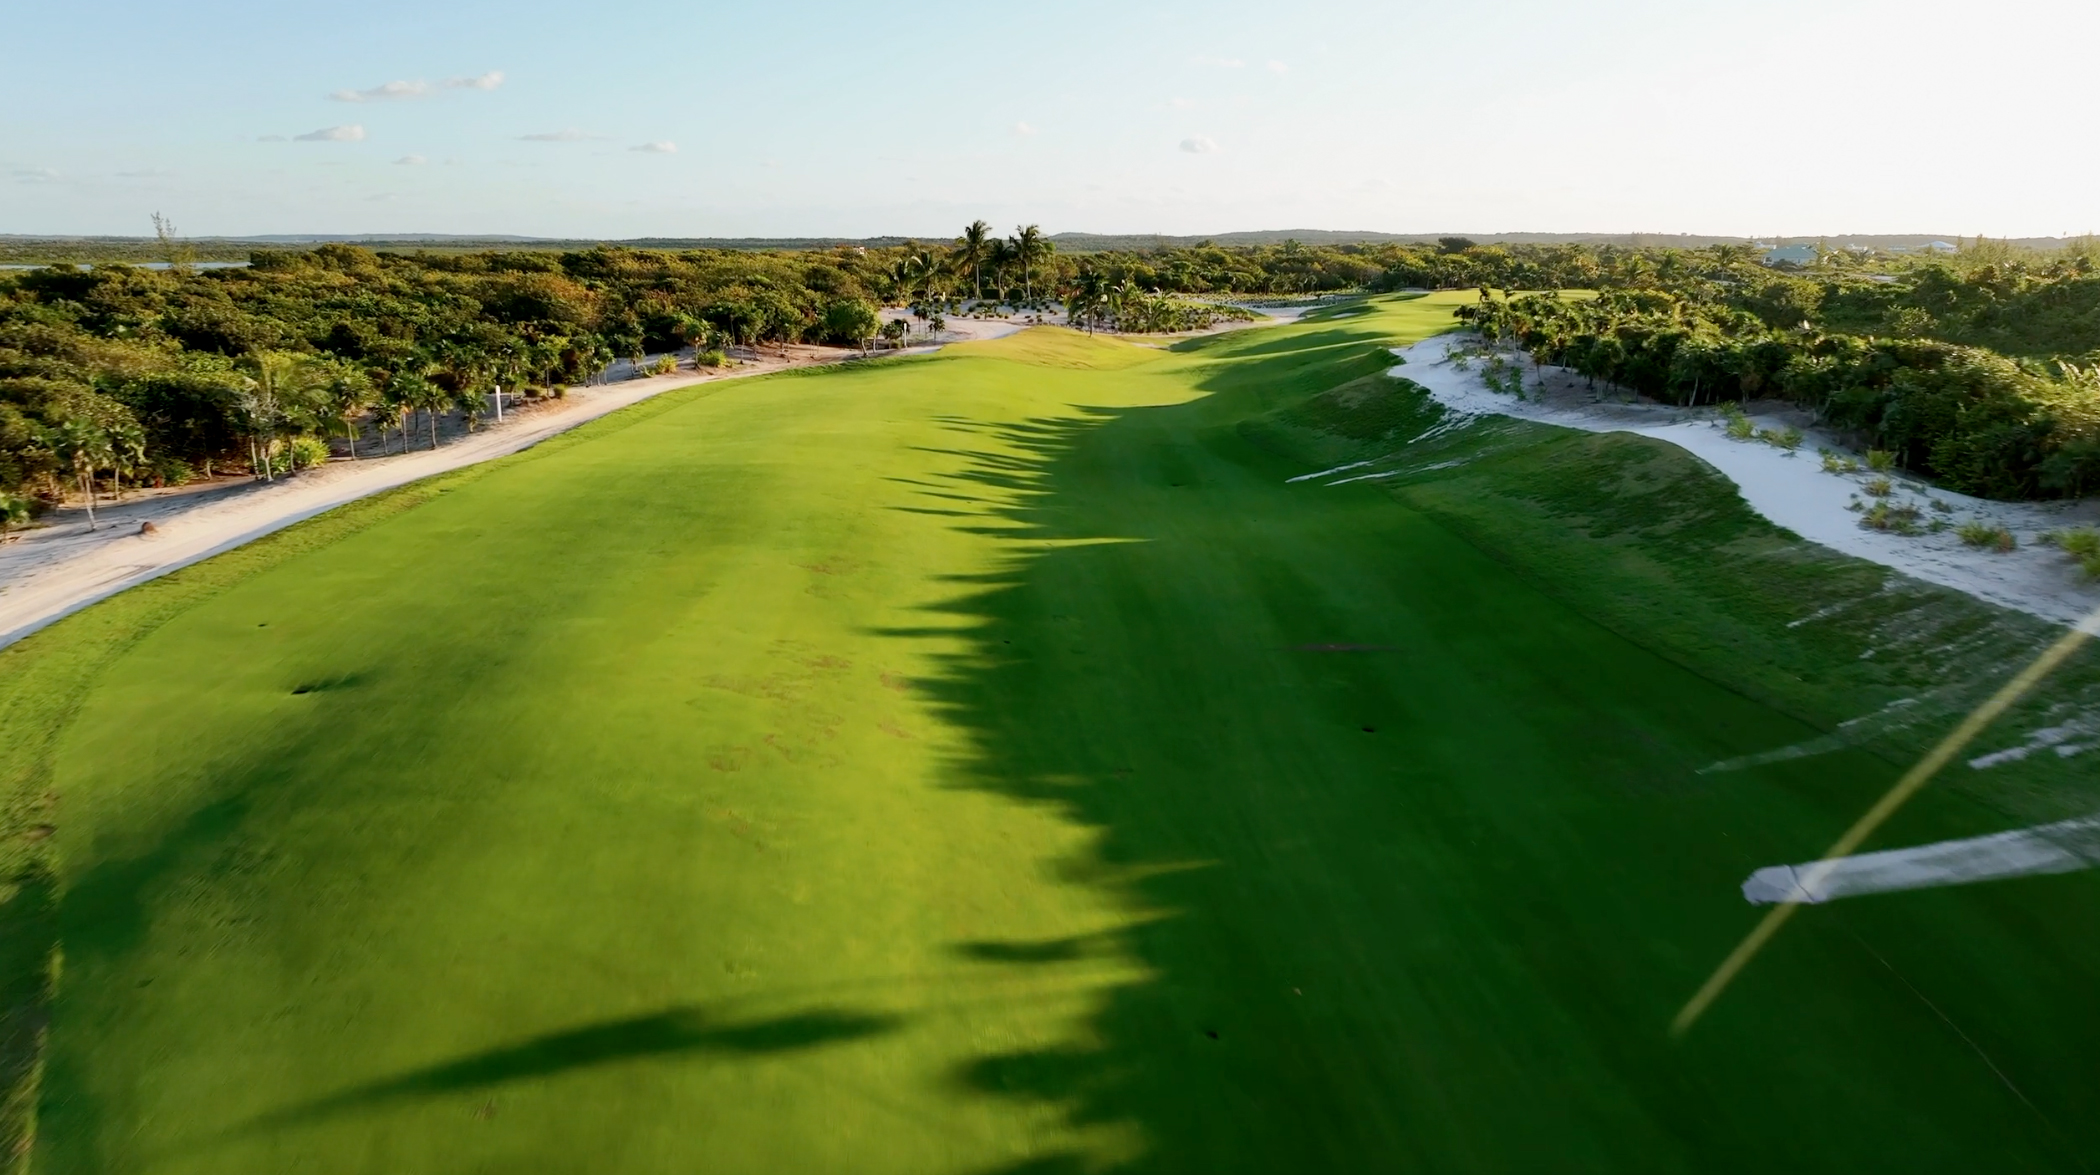 Aerial shot of Hole 9 from The Abaco Club golf course